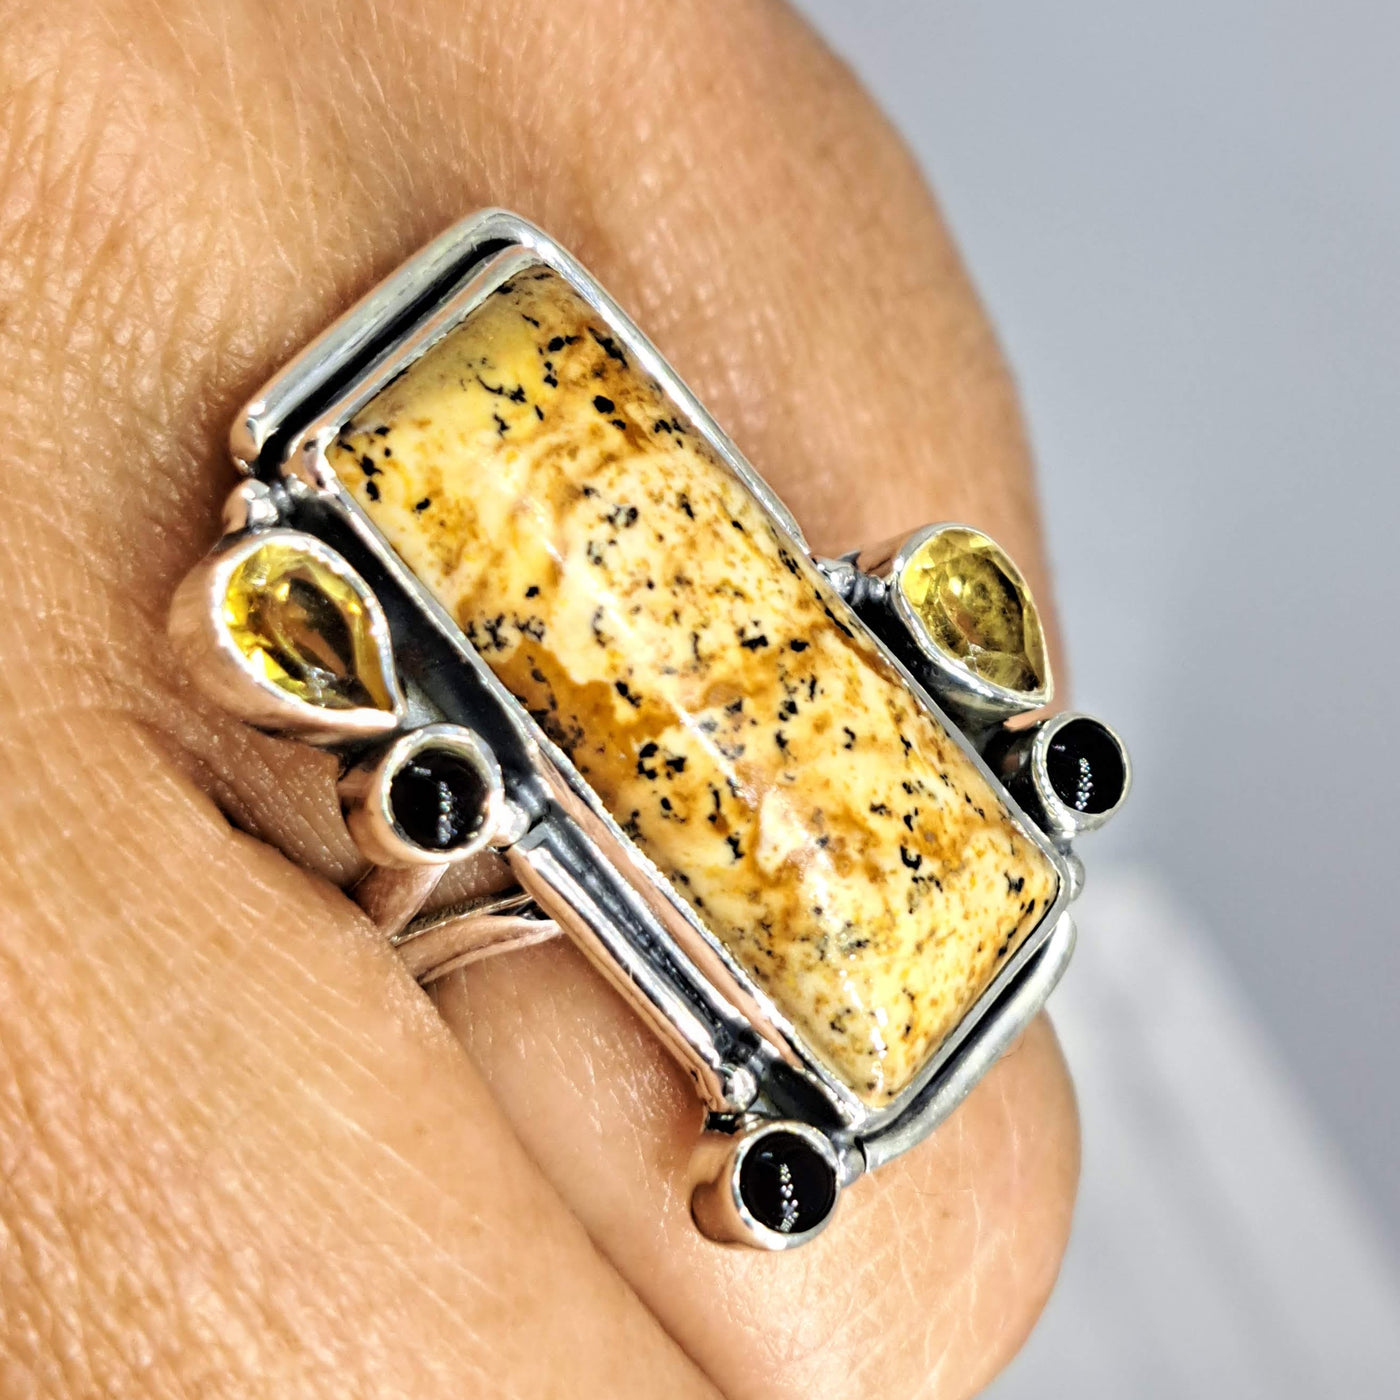 "Picture This!" Sz 7 Ring - Jasper, Citrine, Onyx, Sterling